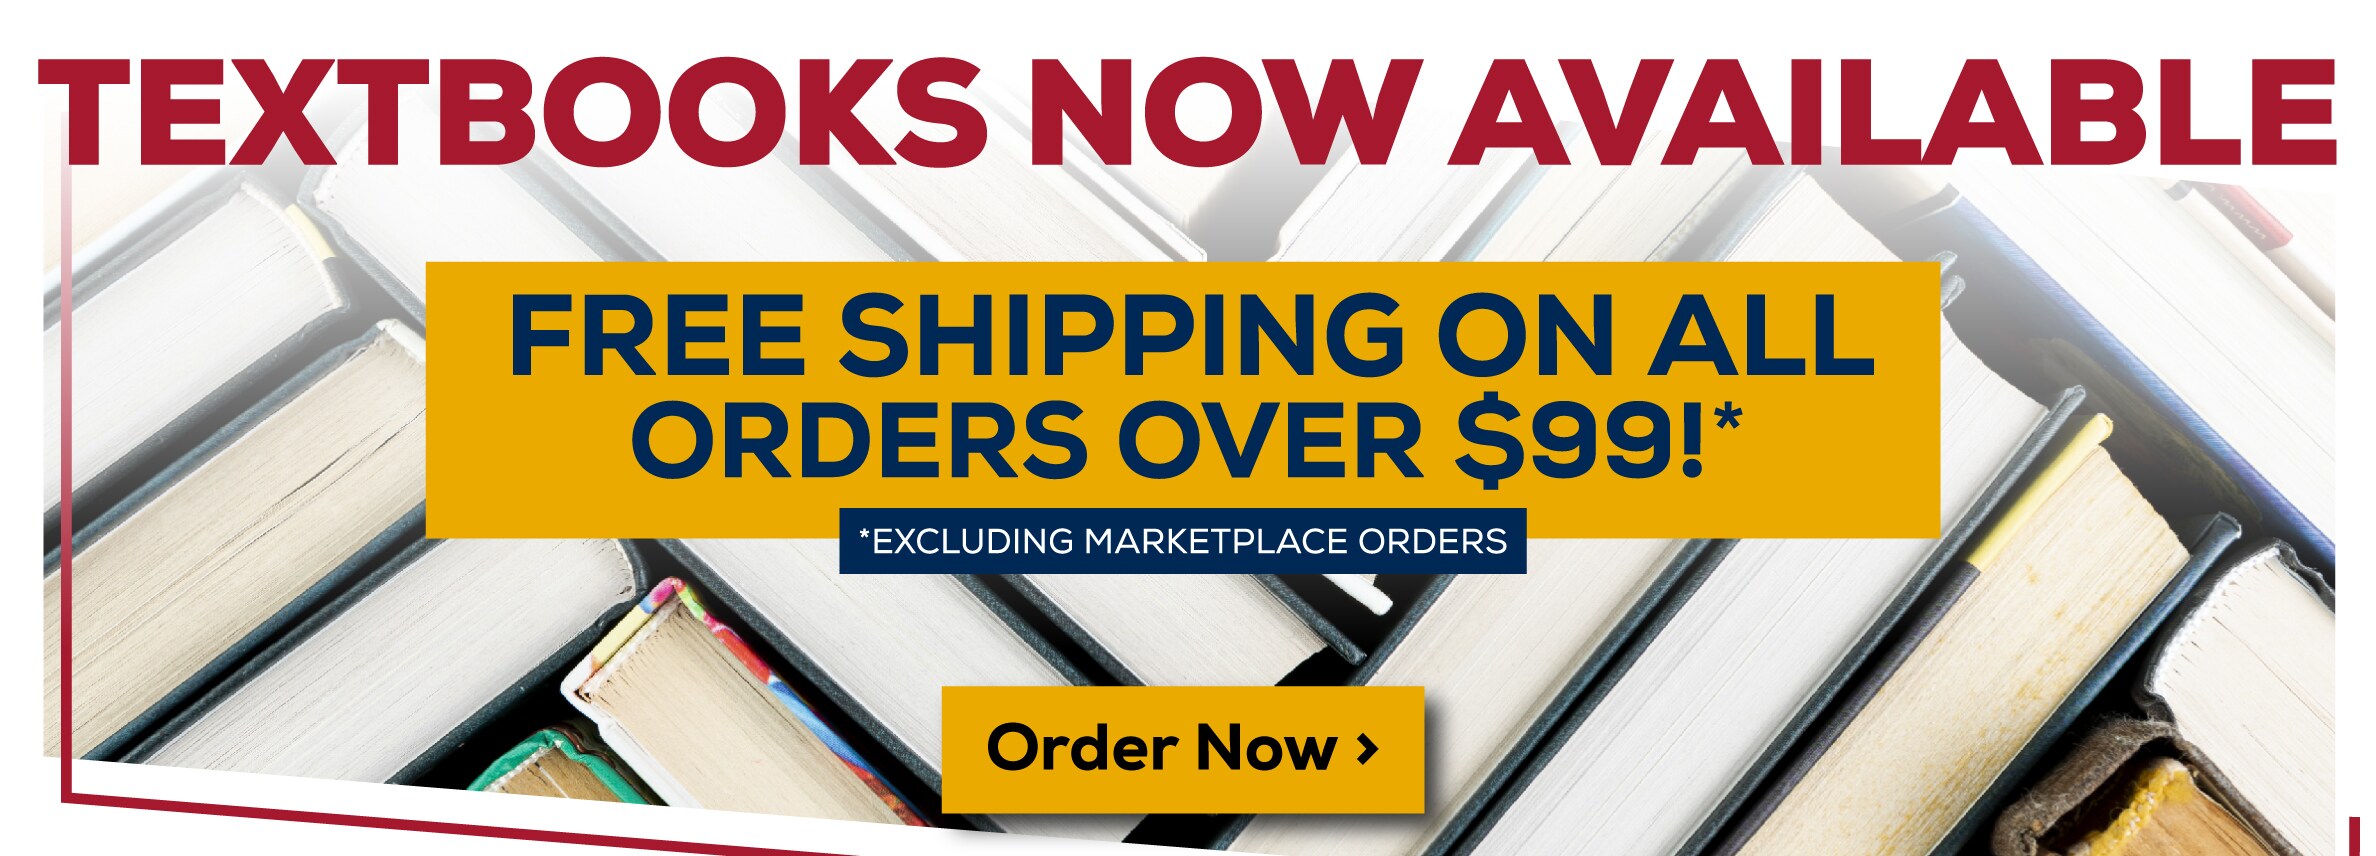 Textbooks Now Available. Free shipping on all orders over $99. Excluding marketplace orders. Order now!